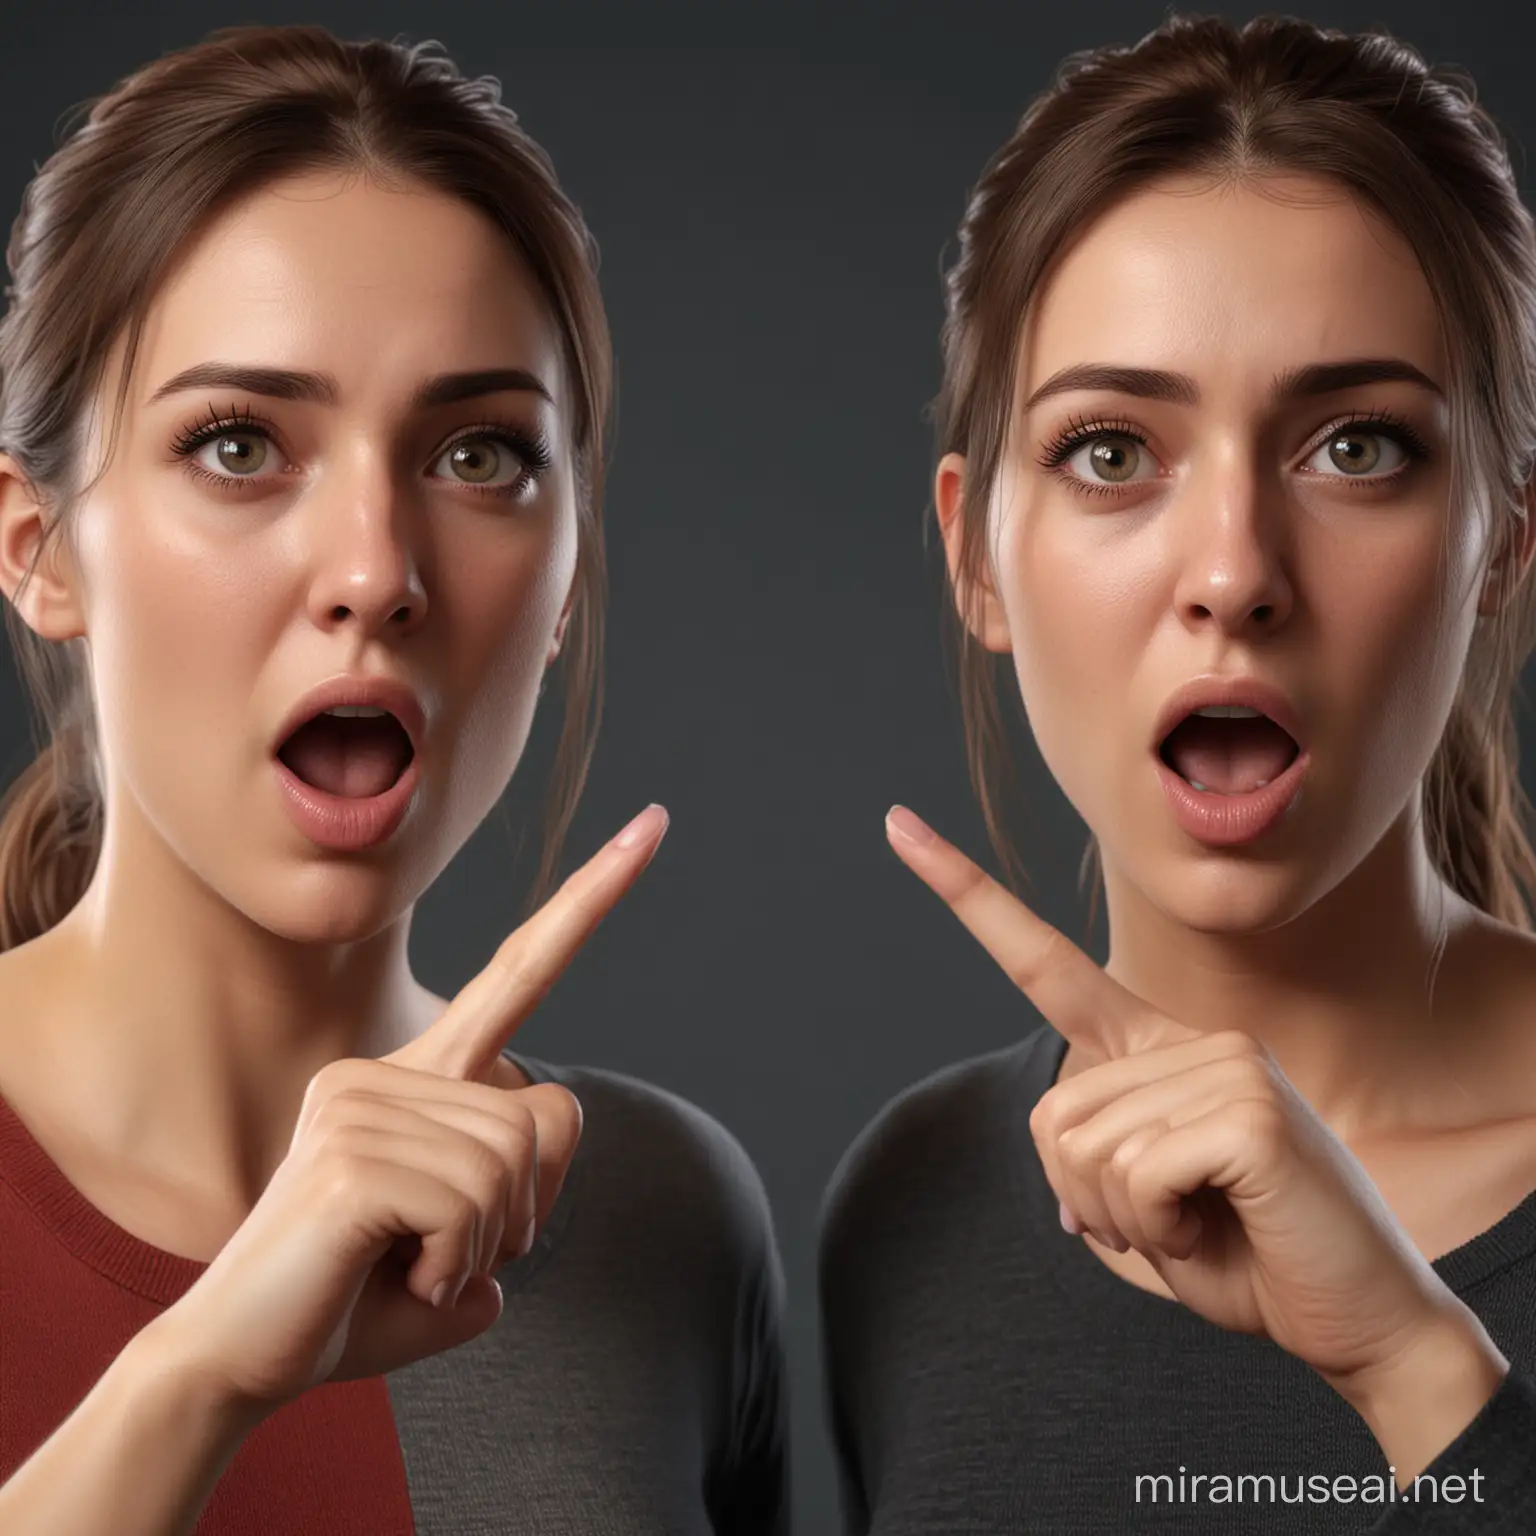 Two almost similar people looking at themselves and pointing in surprise if that's them they should appear surprised and their face should be closer, all in a 4k Unreal engine render